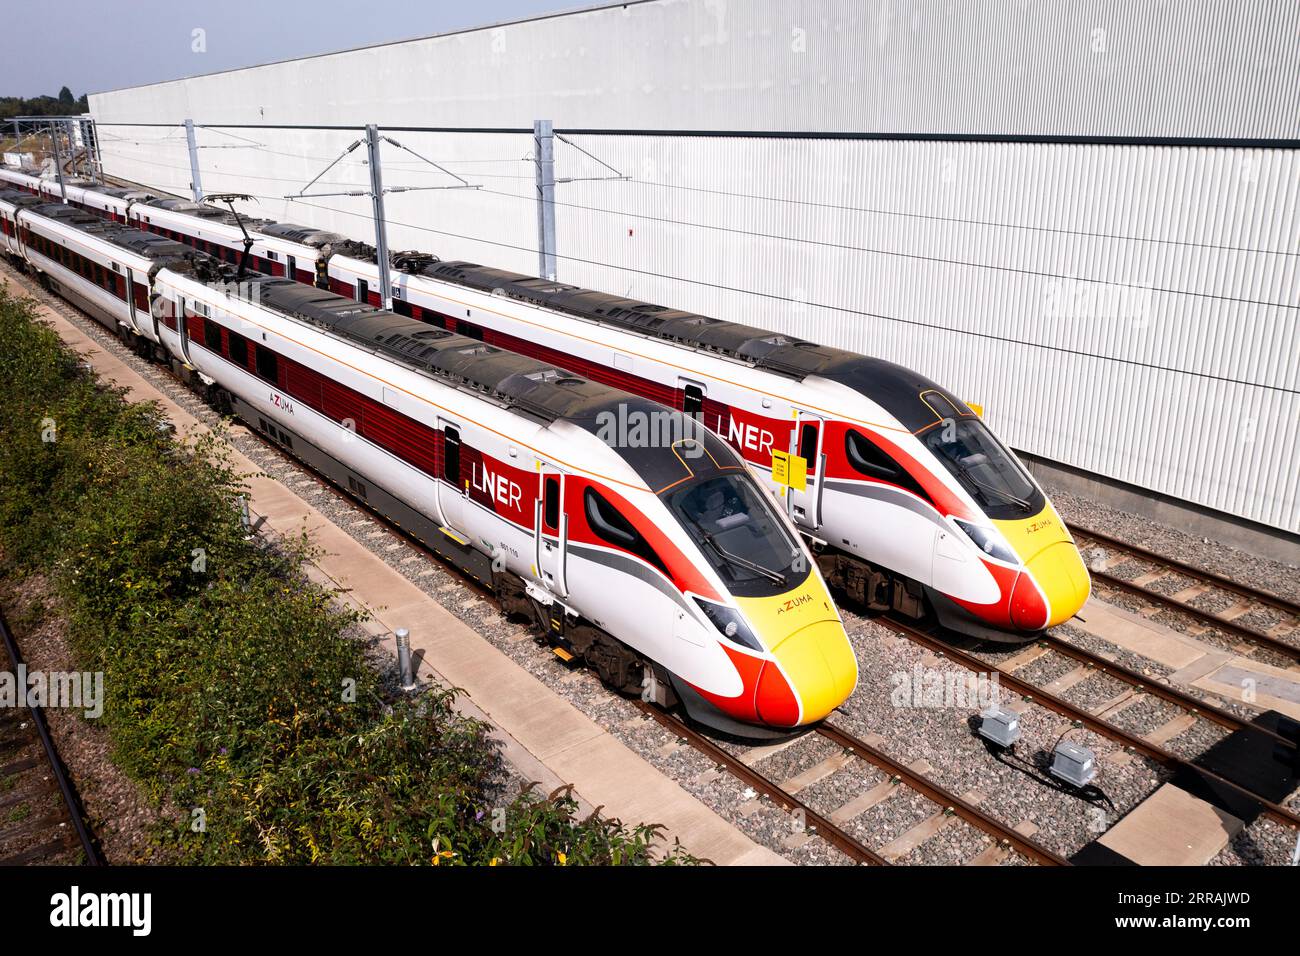 DONCASTER, UK - SEPTEMBER 6, 2023.  Aerial view of new Hitachi Azuma AT300 Intercity passenger trains in LNER livery on the maintenance depot in Donca Stock Photo